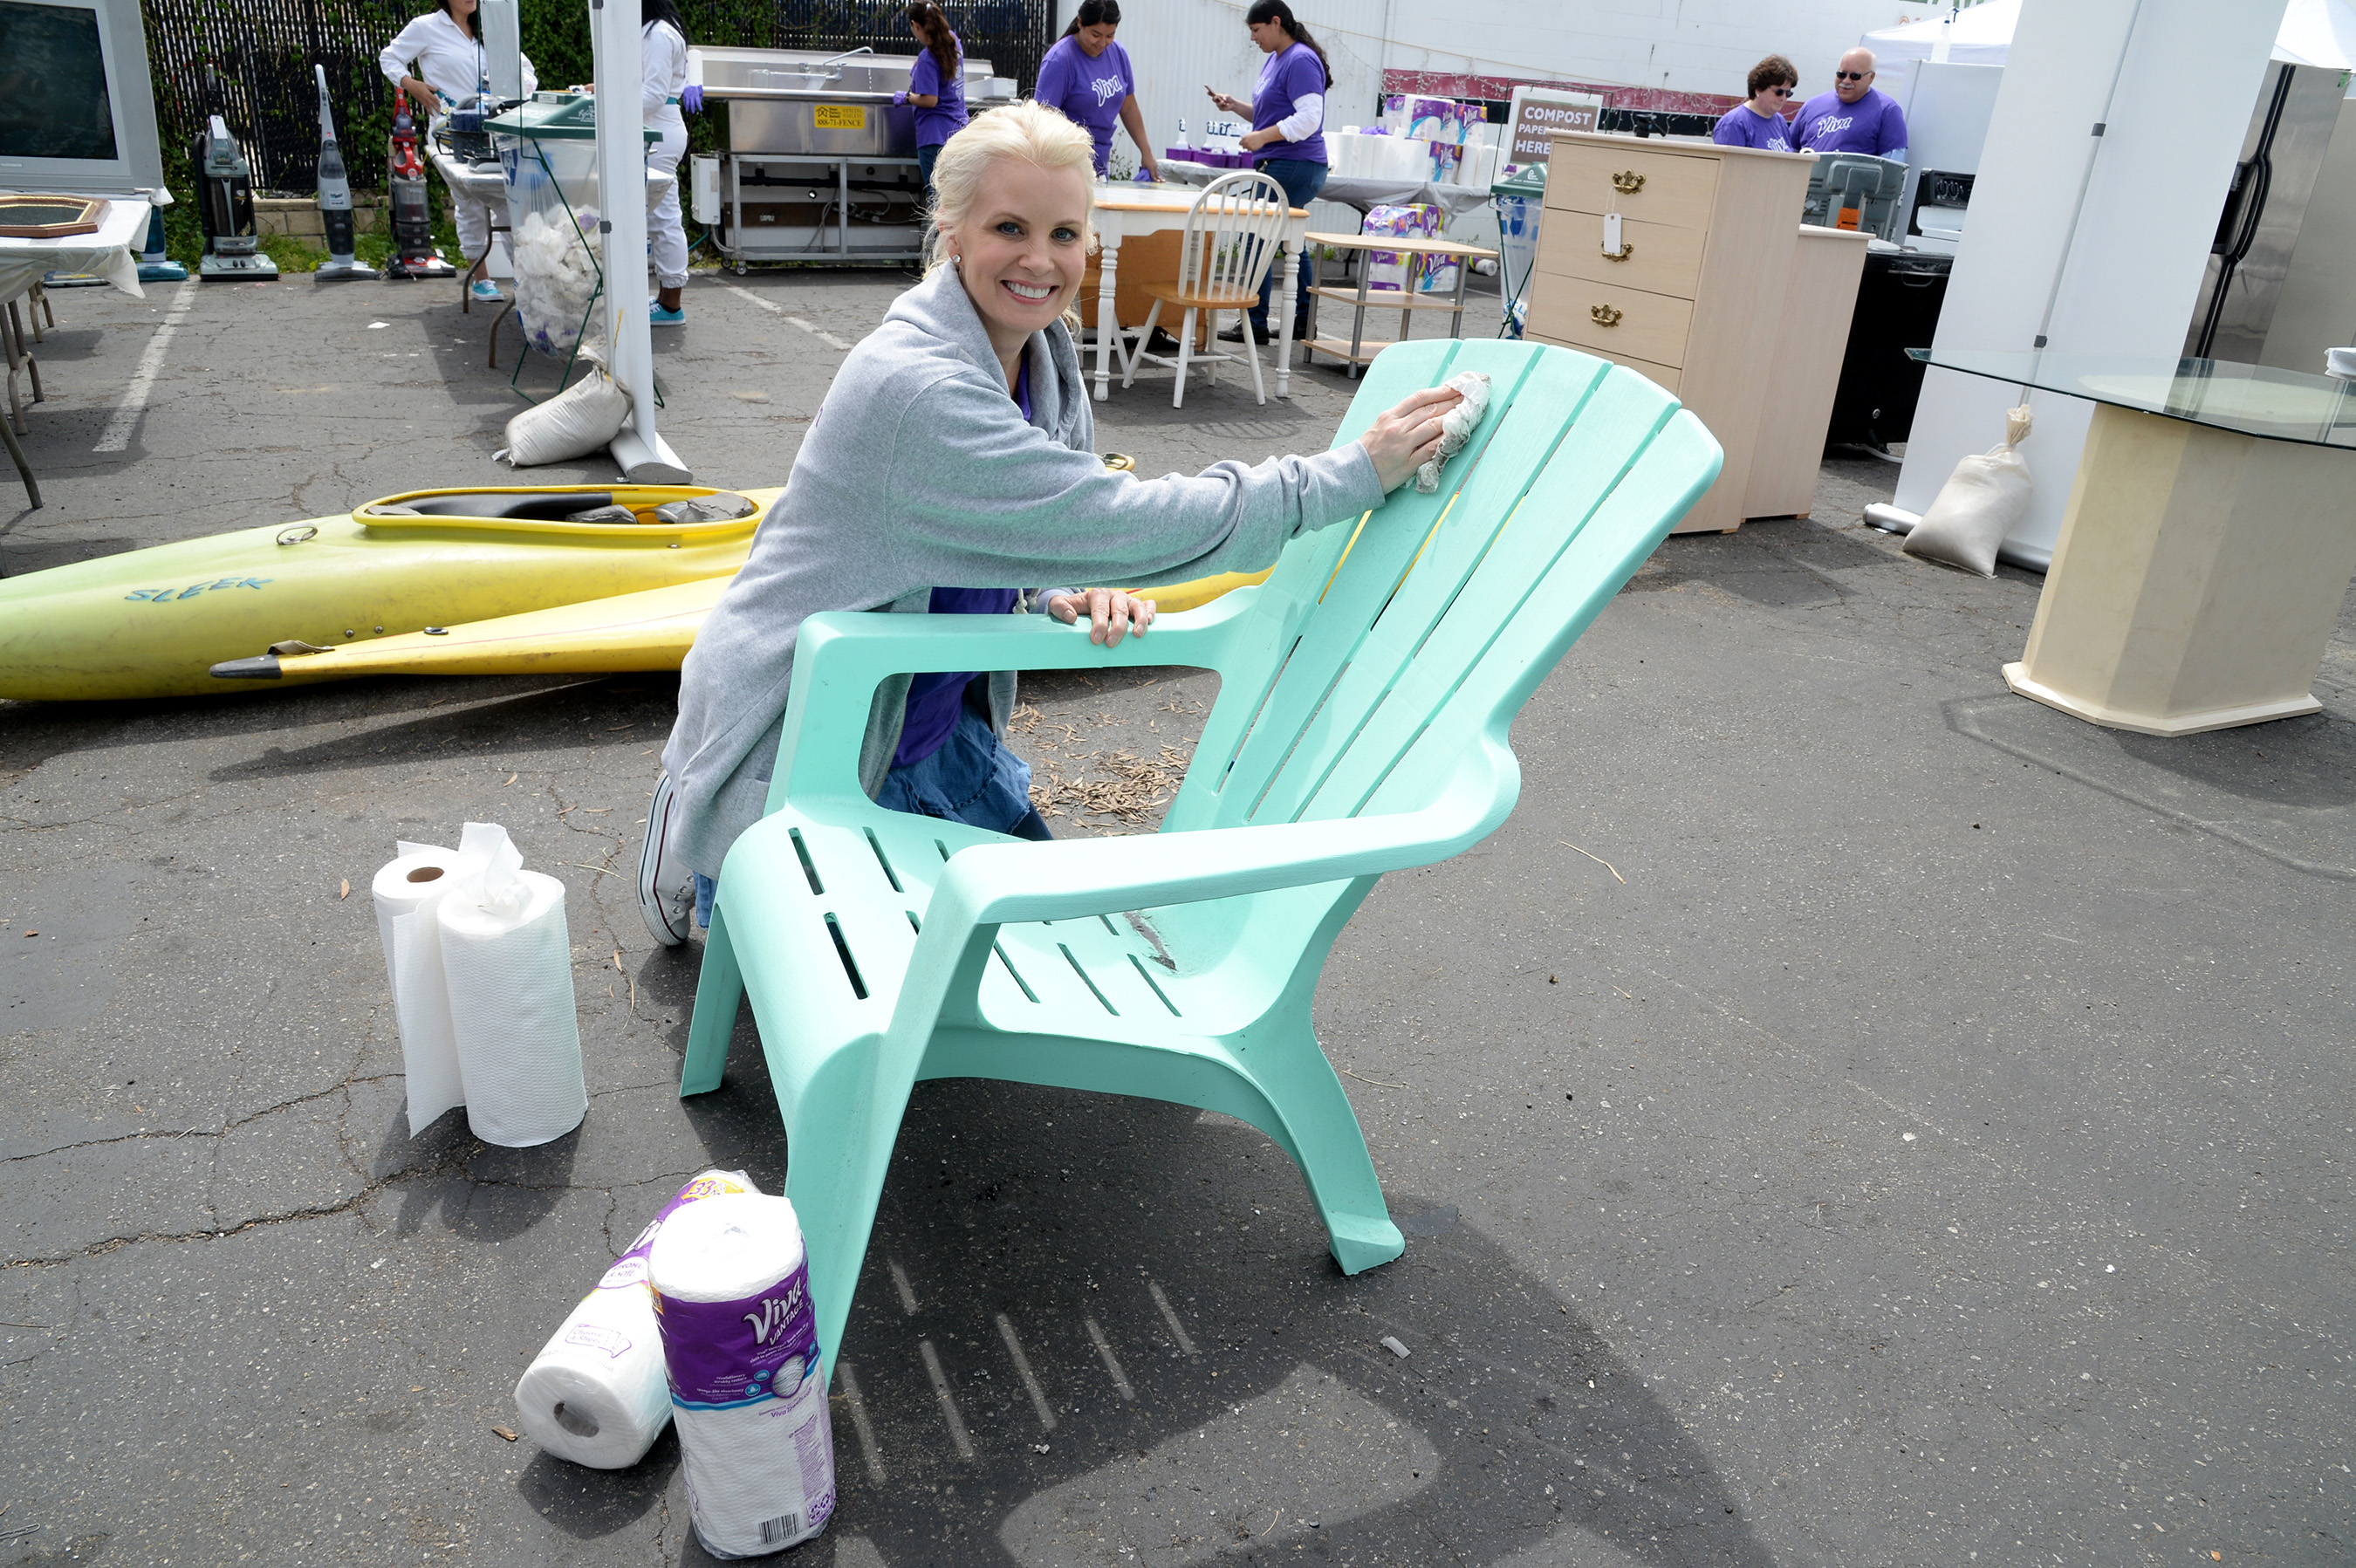 VENTURA, CALIFORNIA - APRIL 06: Actress and home/DIY expert Monica Potter teams up with Viva Towels and the Boys and Girls Club of Greater Ventura to unleash clean on donated furniture, electronics and appliances, then give them to families in need at Avenue Thrift & Vintage on April 6, 2016 in Ventura, California. (Photo by Michael Kovac/Getty Images for Viva (Kimberly-Clark))